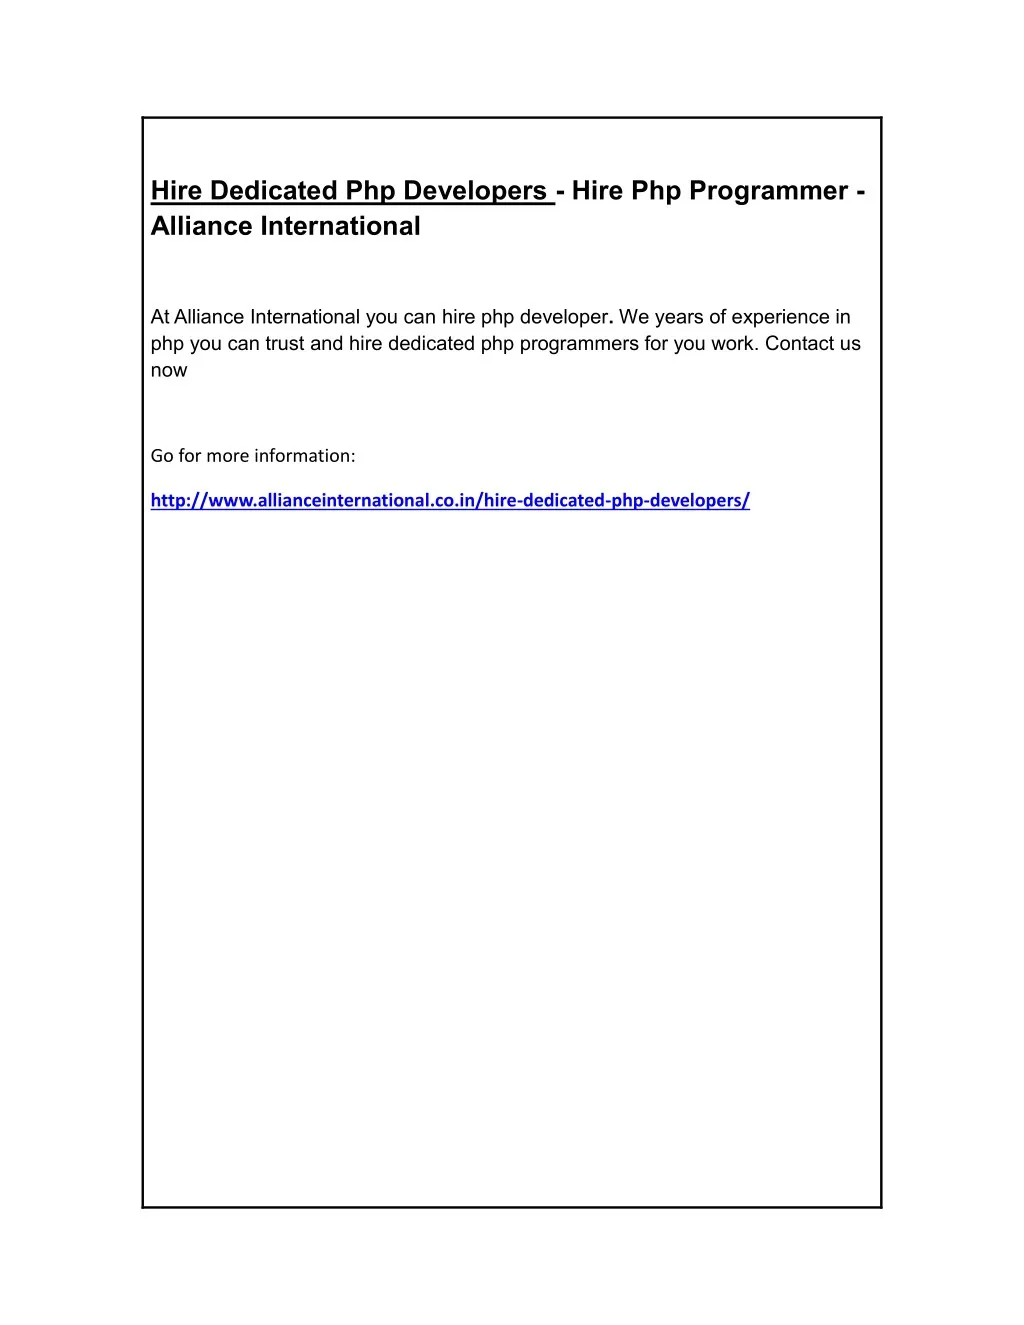 hire dedicated php developers hire php programmer